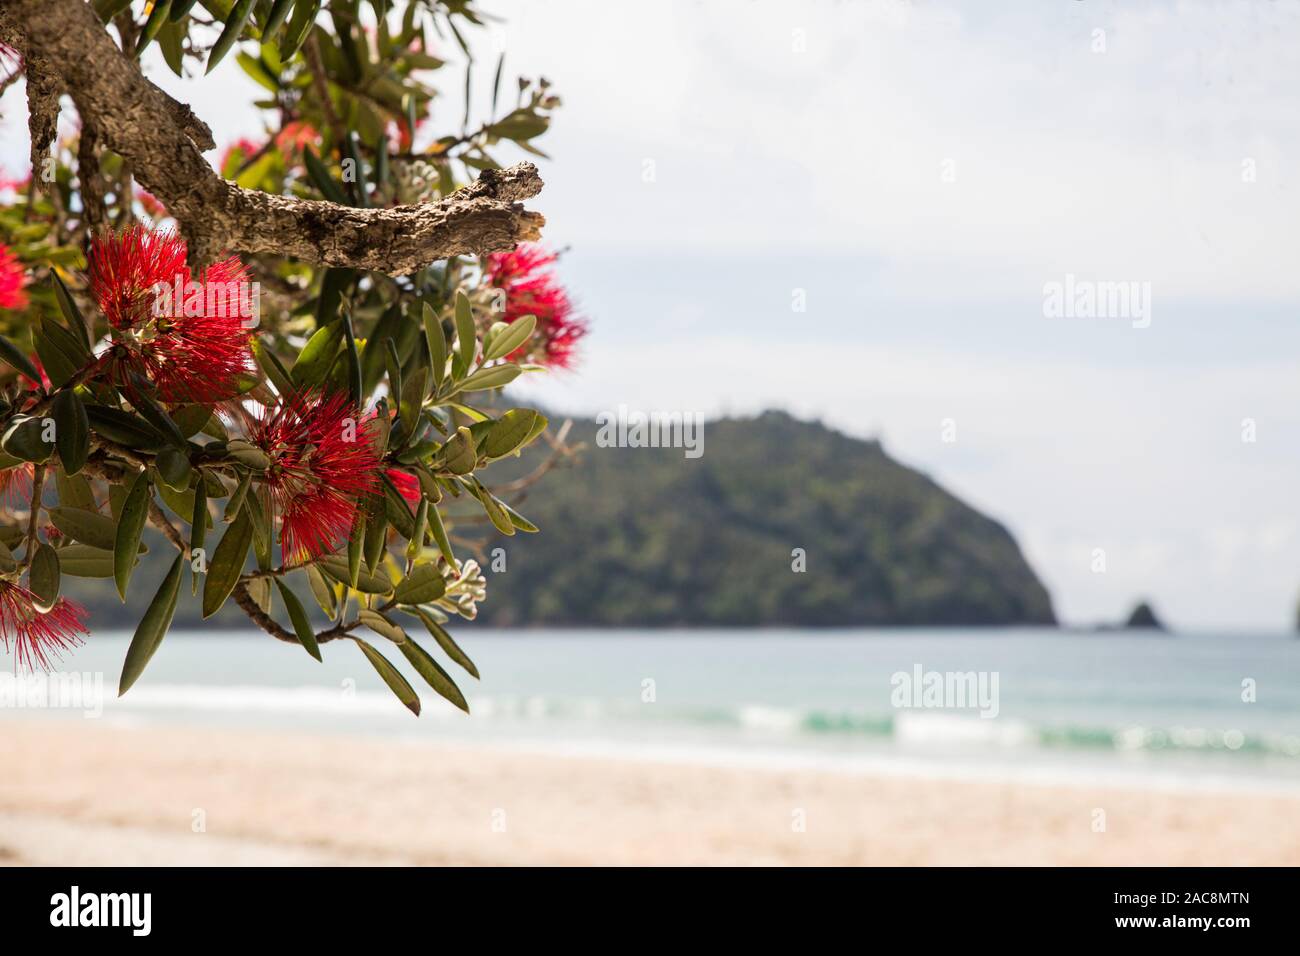 A pohutukawa tree in blossom overlooks a beautiful New Zealand beach in the Coromandel Peninsula during a hot summers day. Stock Photo